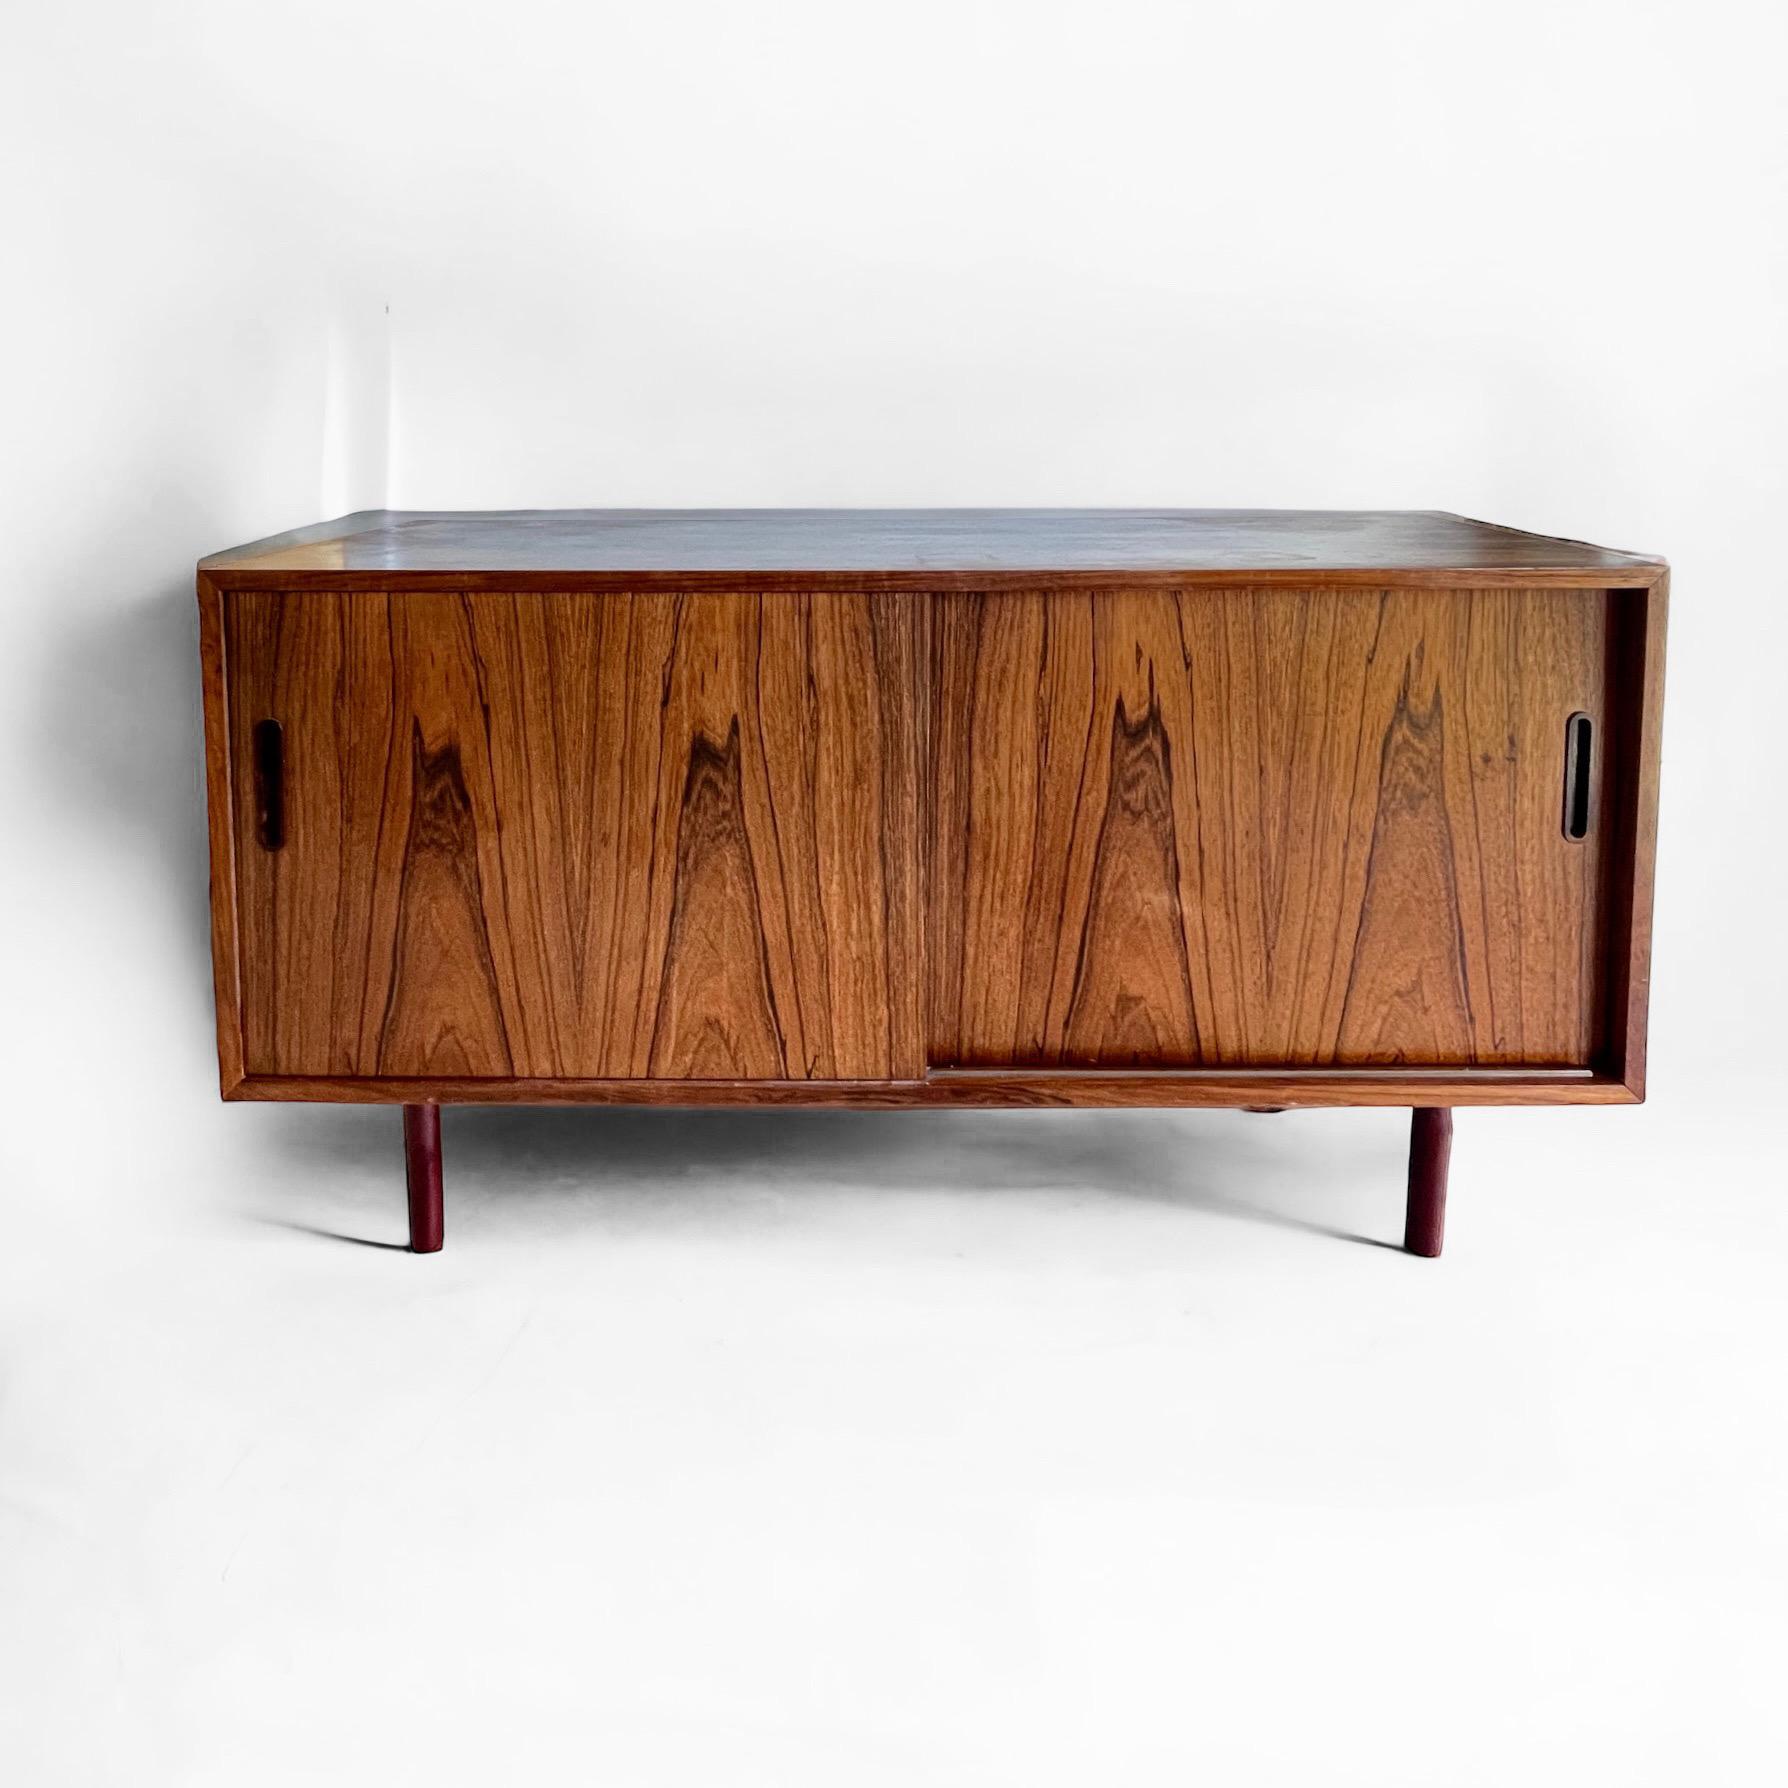 Wood Danish Credenza by Poul Hundavad from Hundevad & Co For Sale